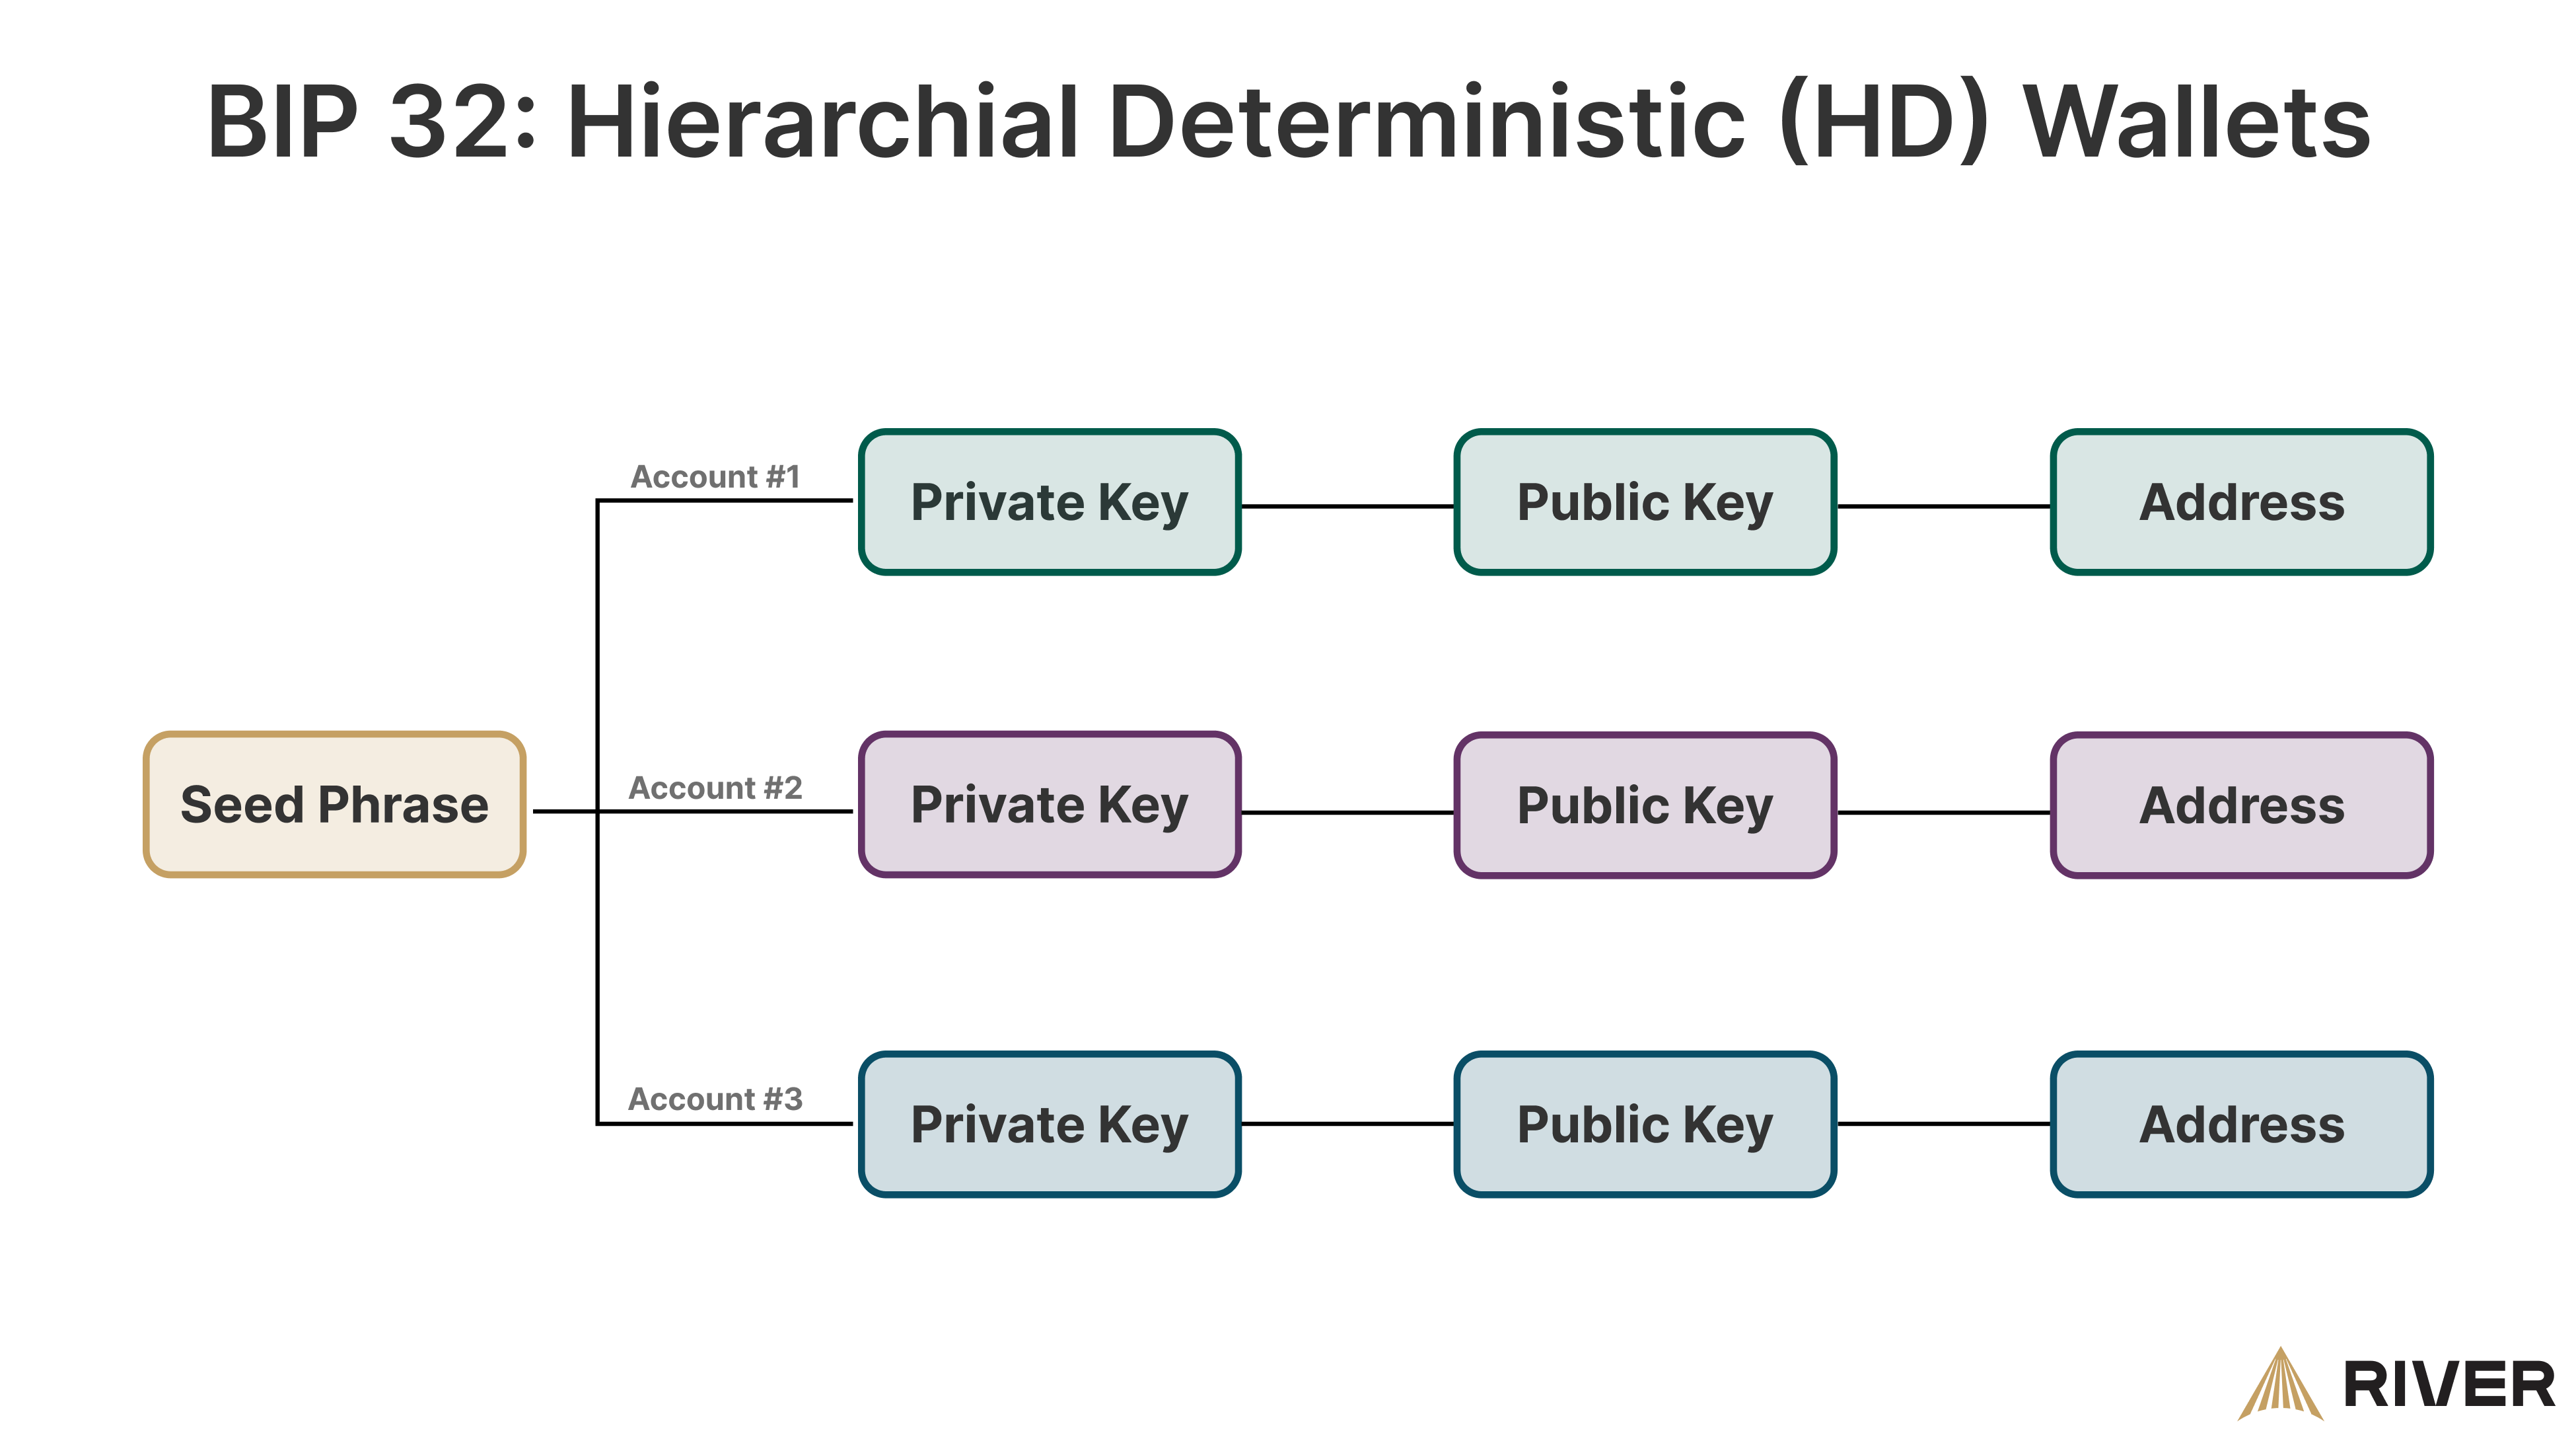 An infographic illustrating the structure of BIP 32 Hierarchical Deterministic (HD) Wallets, showing how a seed phrase gives rise to multiple accounts each with its own private key, public key, and address.